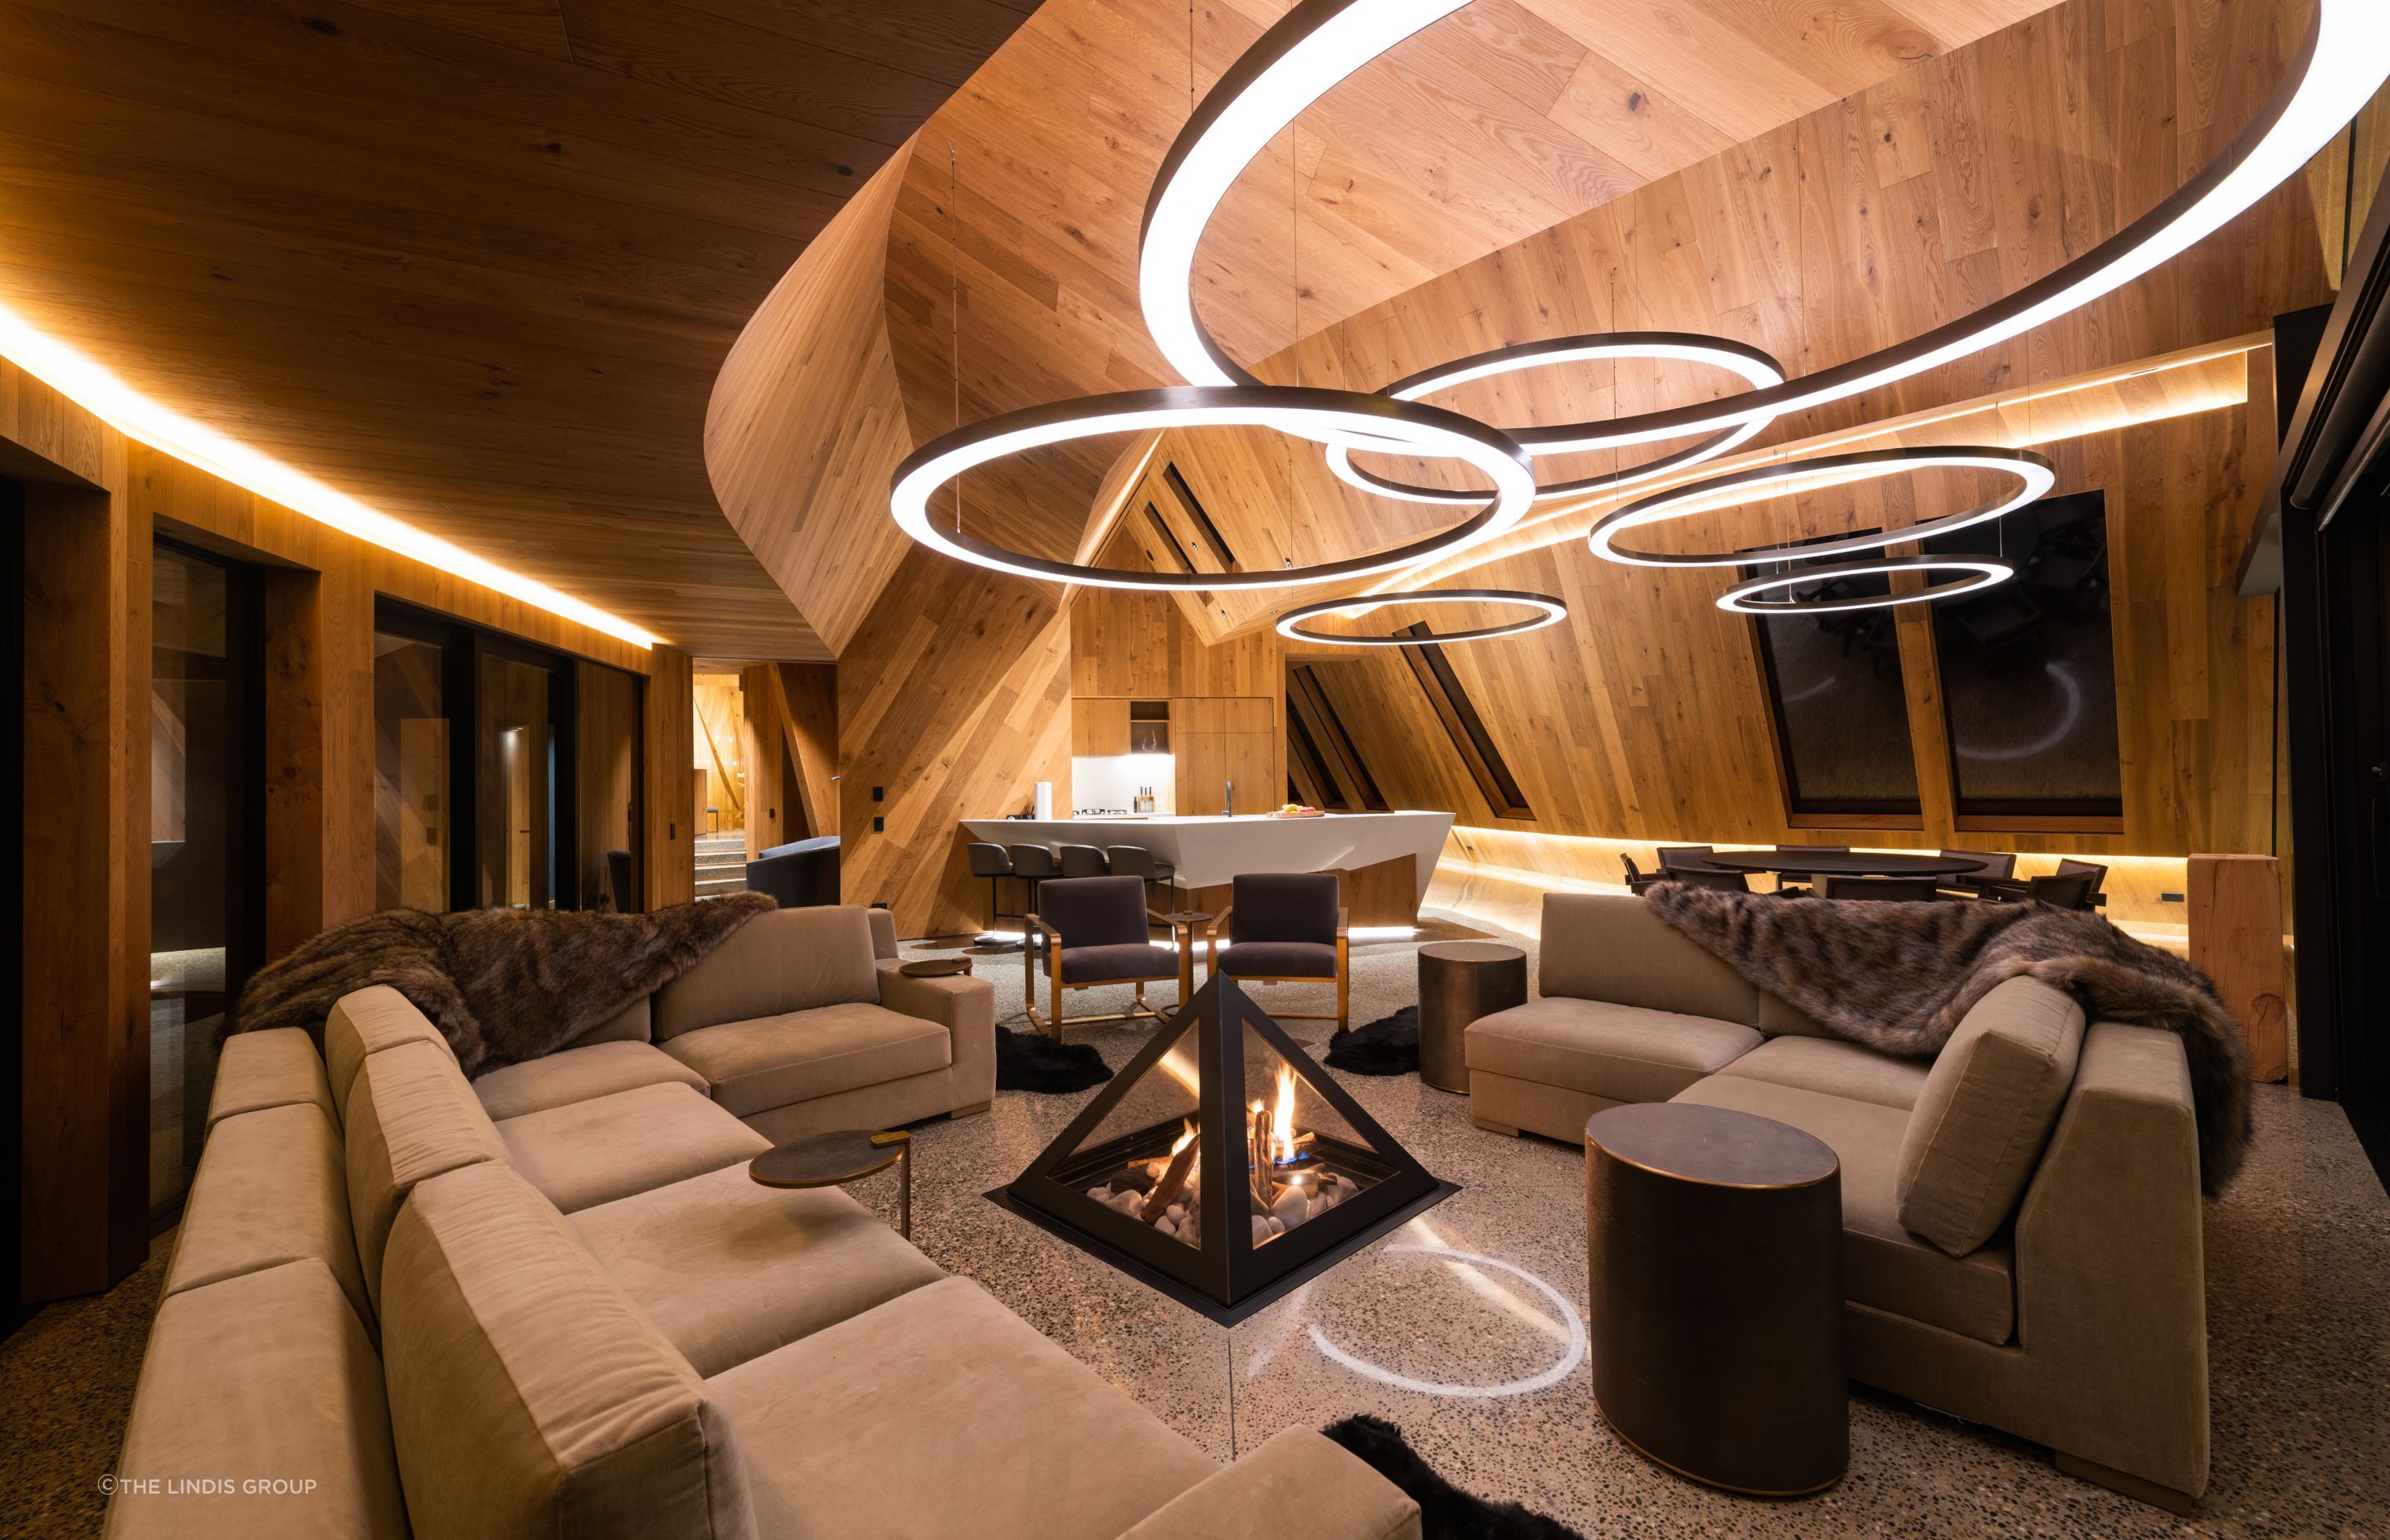 A pyramid fireplace is a focal point in the lounge, referencing the copper peaks on the roof.